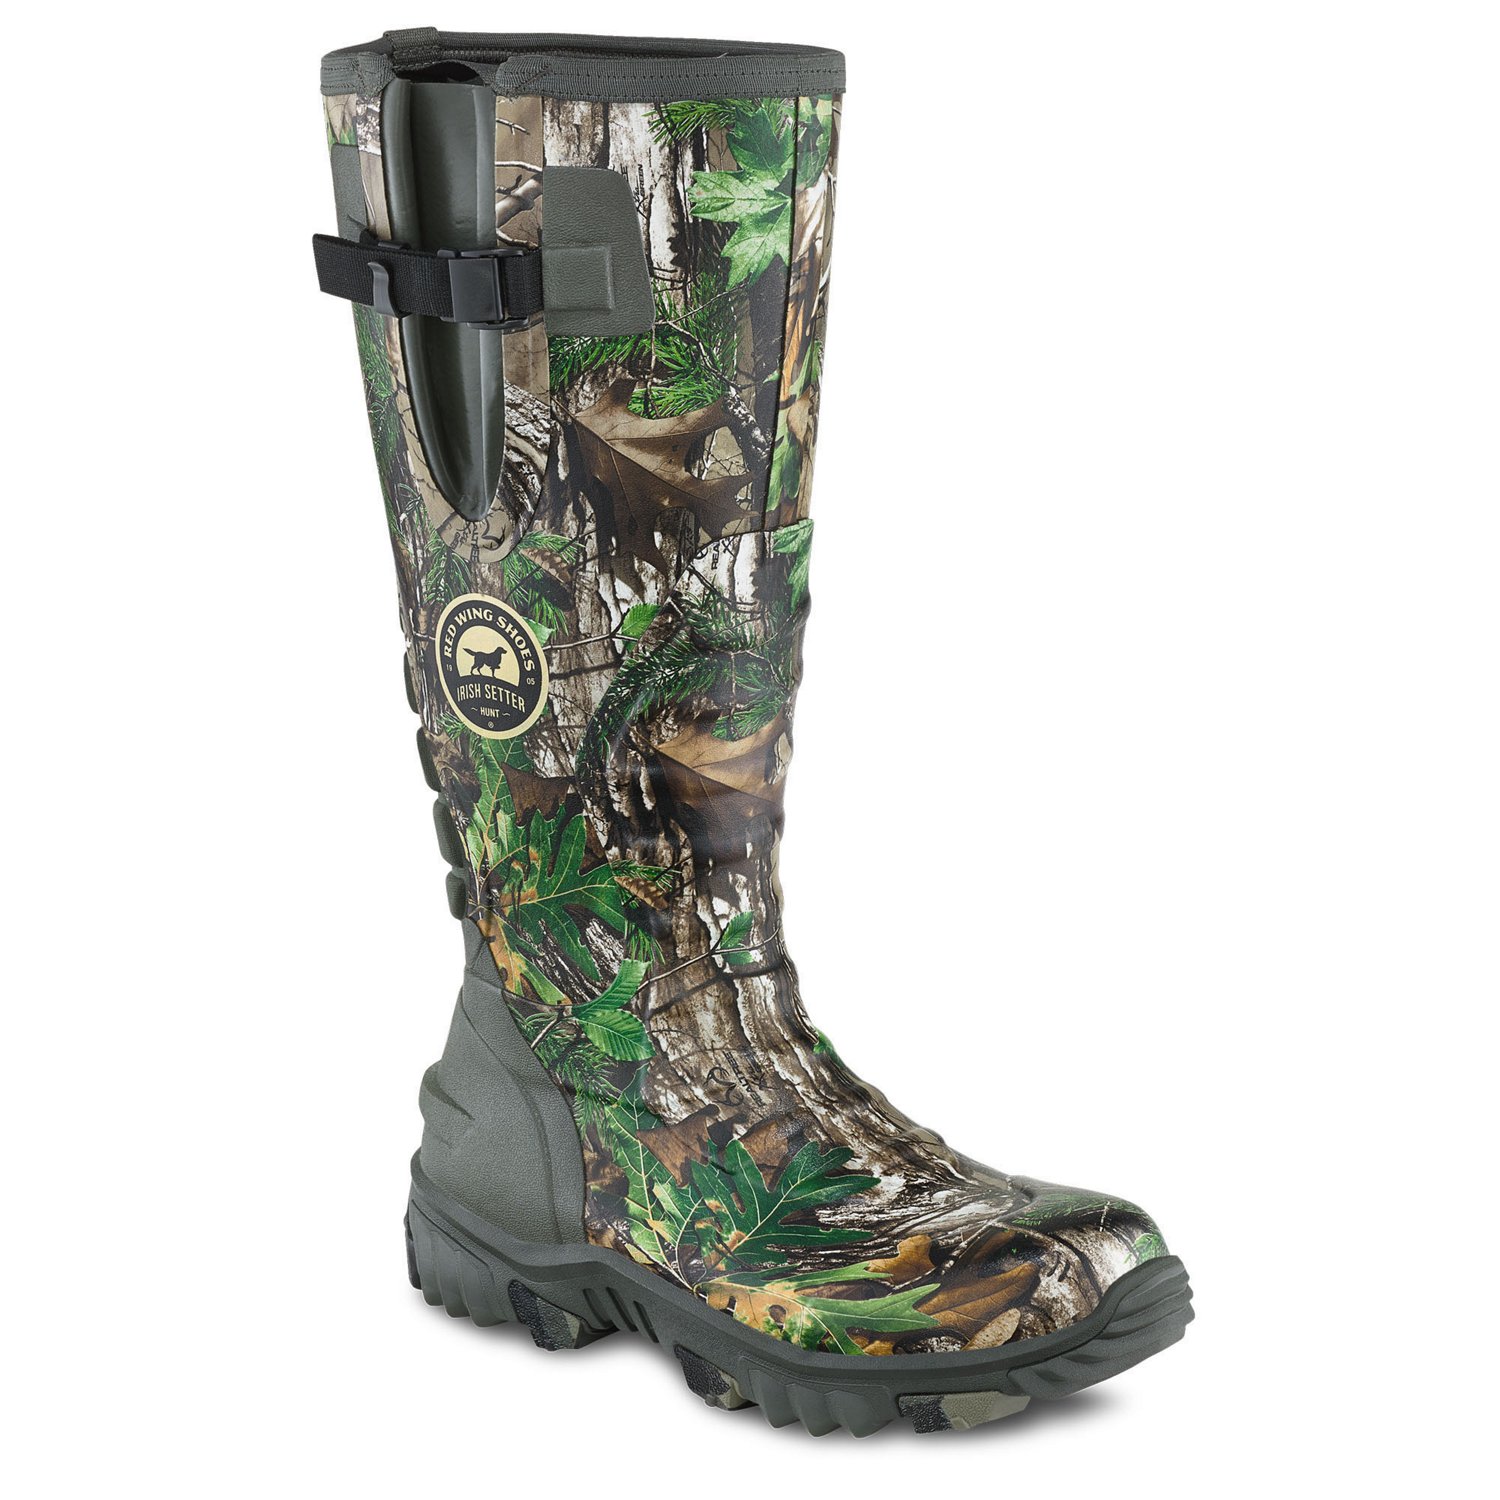 Men's Hunting Boots | Camo Boots & Hunting Boots for Men | Academy